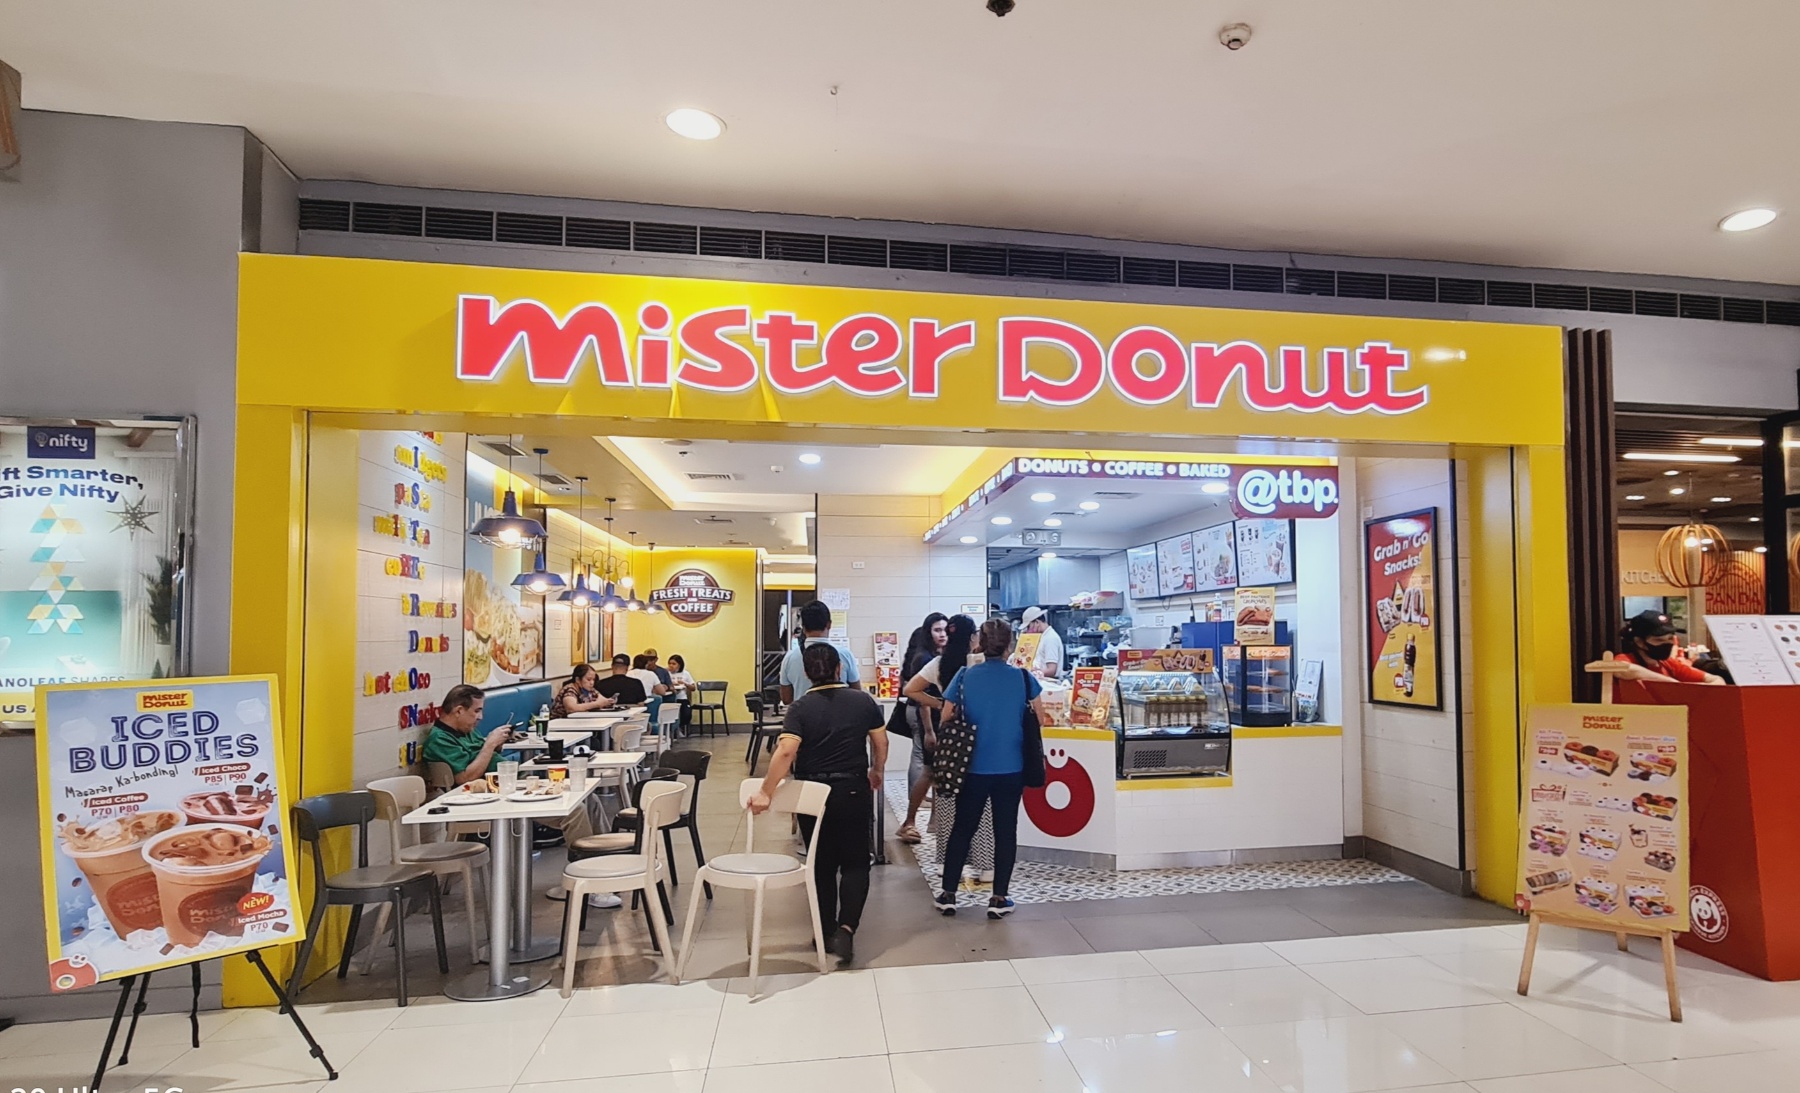 Mister Donut launches franchise offers for convenience stores, coffee shops 